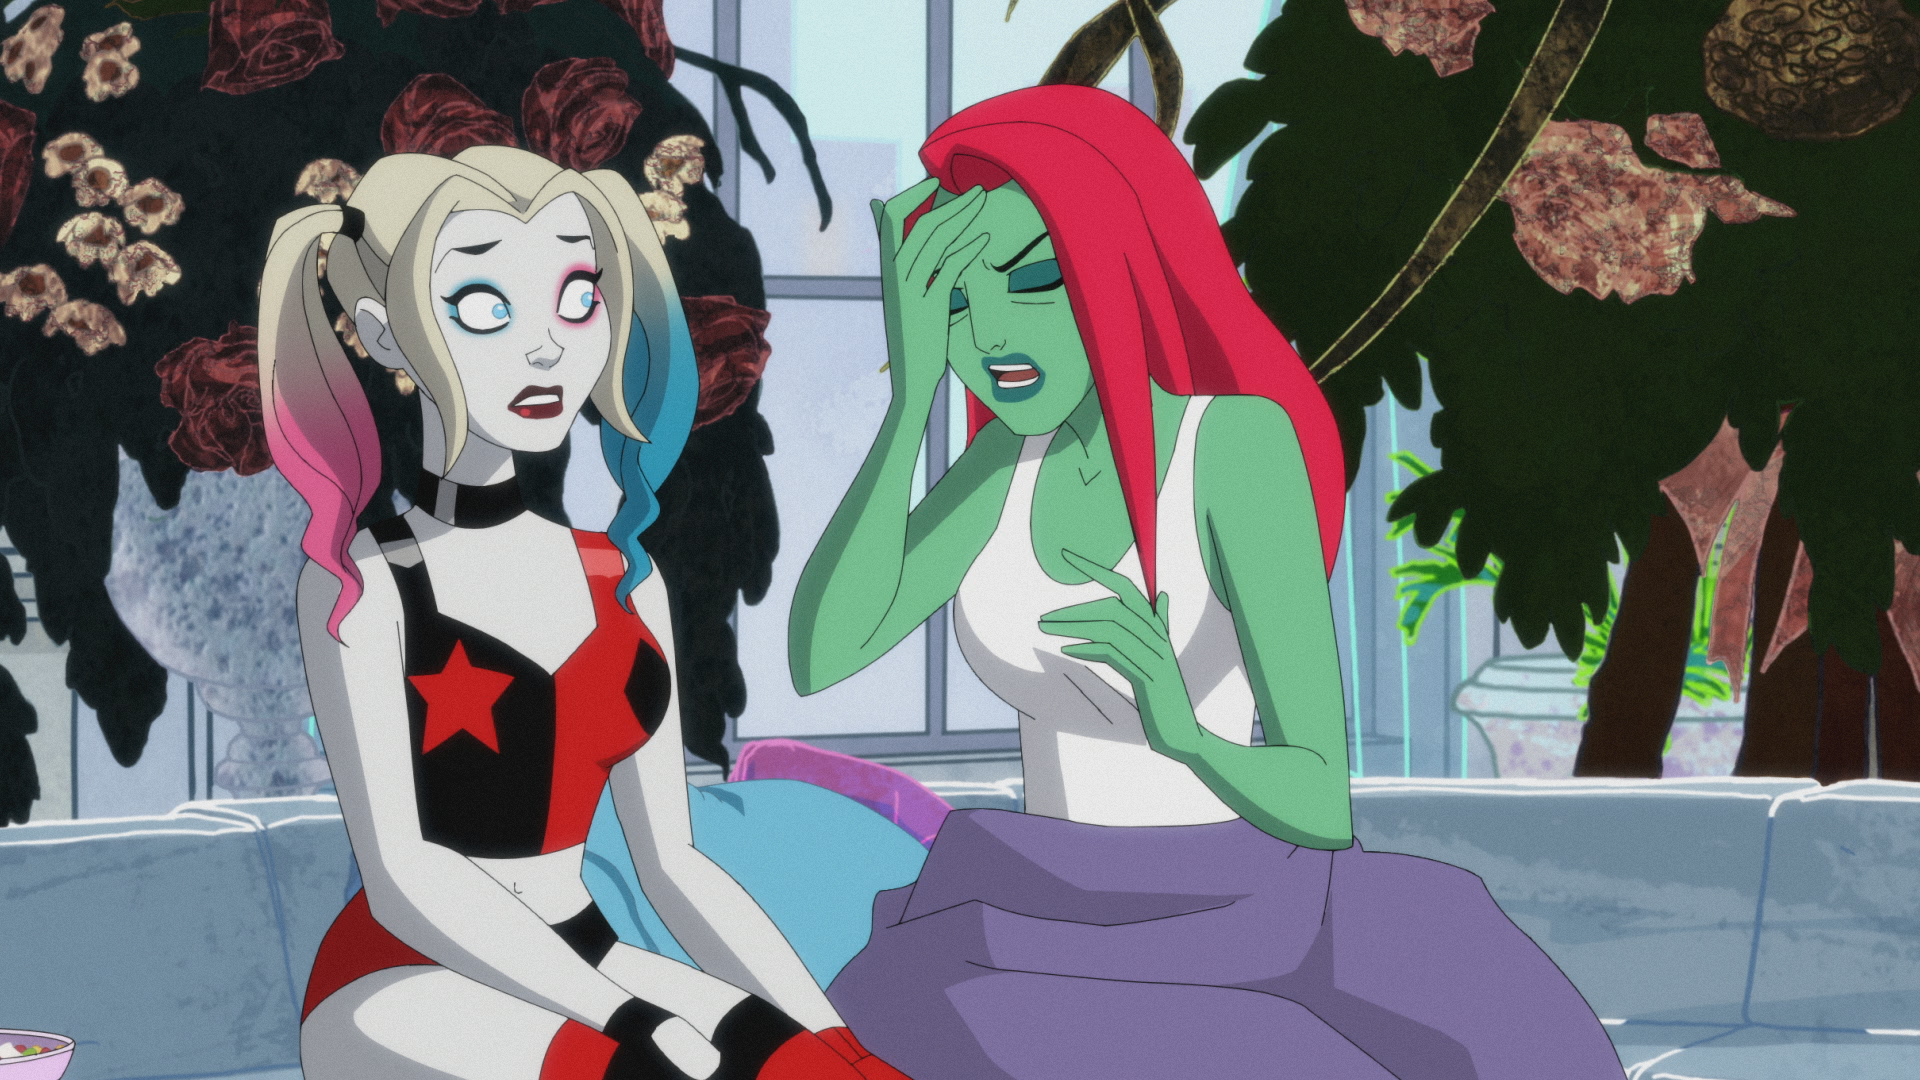 Harley Quinn 3x07 Review - What are best friends for?